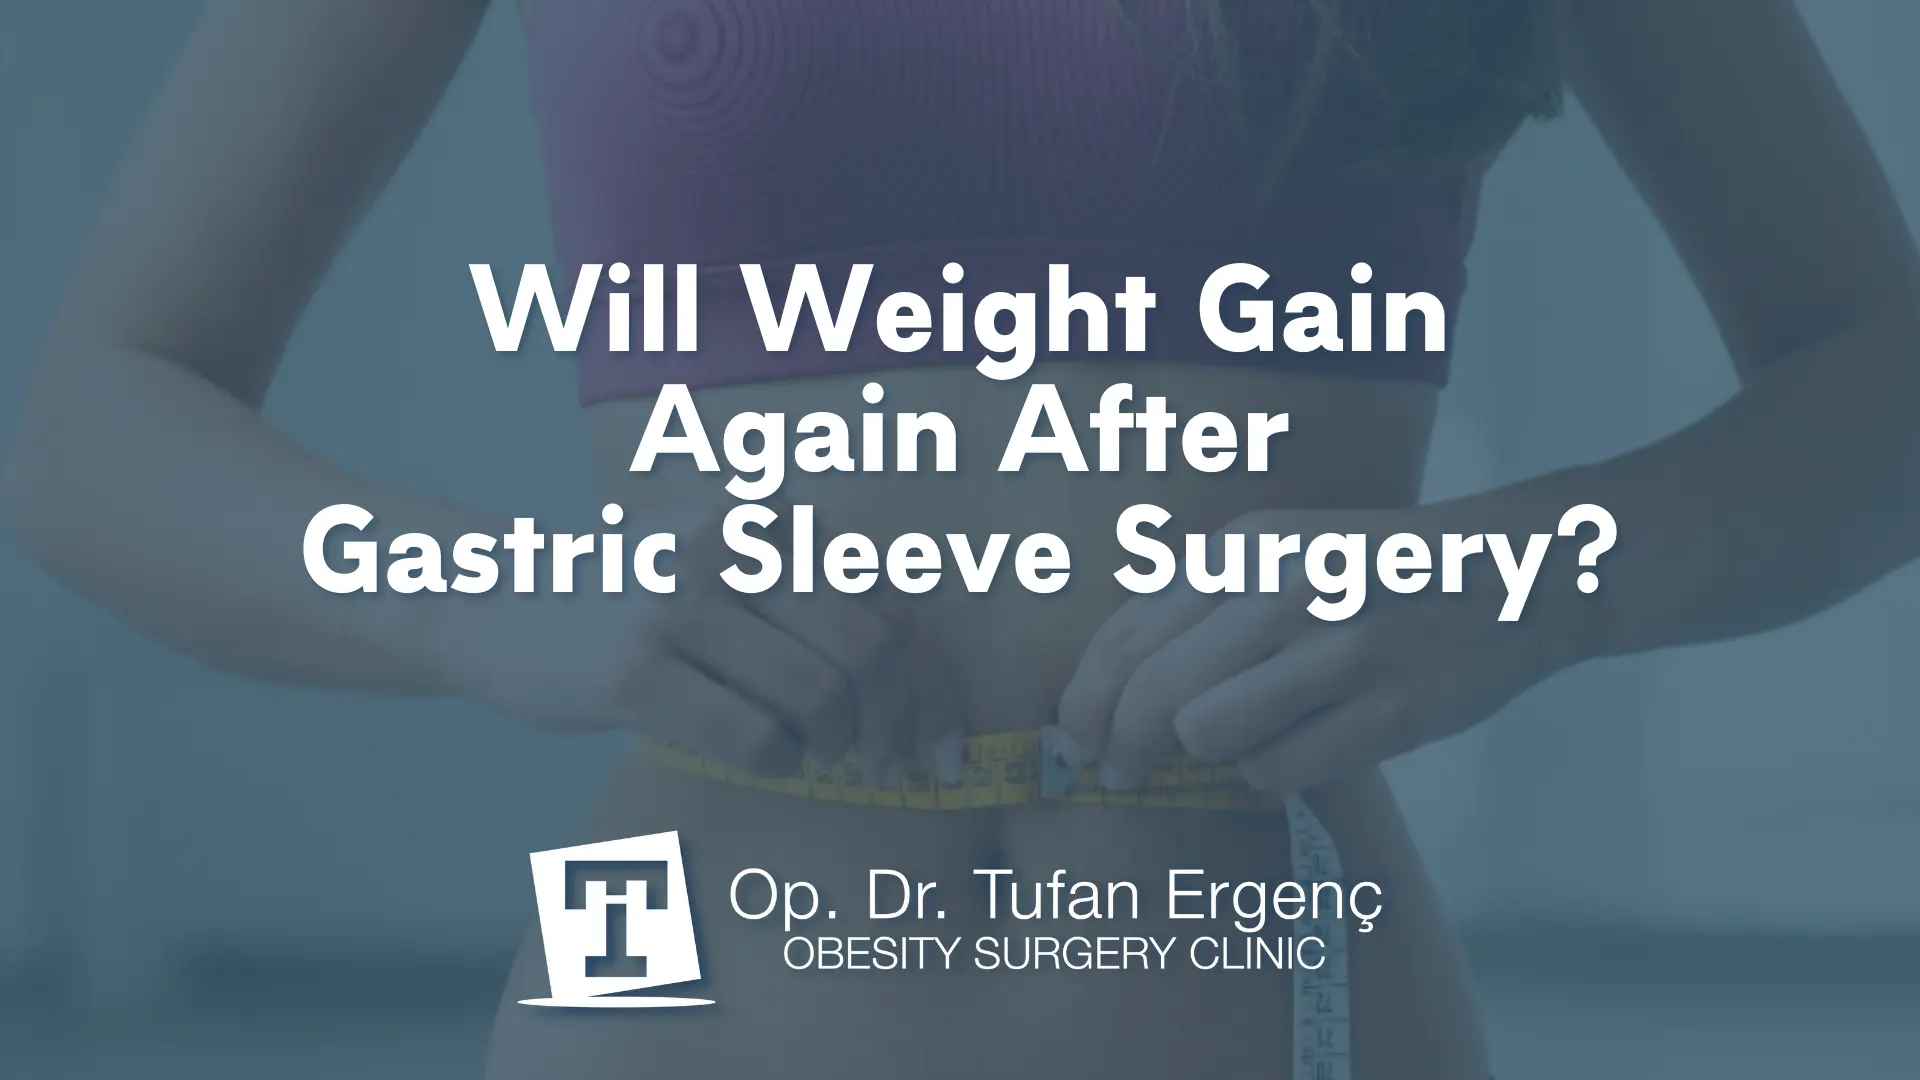 After Gastric Sleeve Surgery